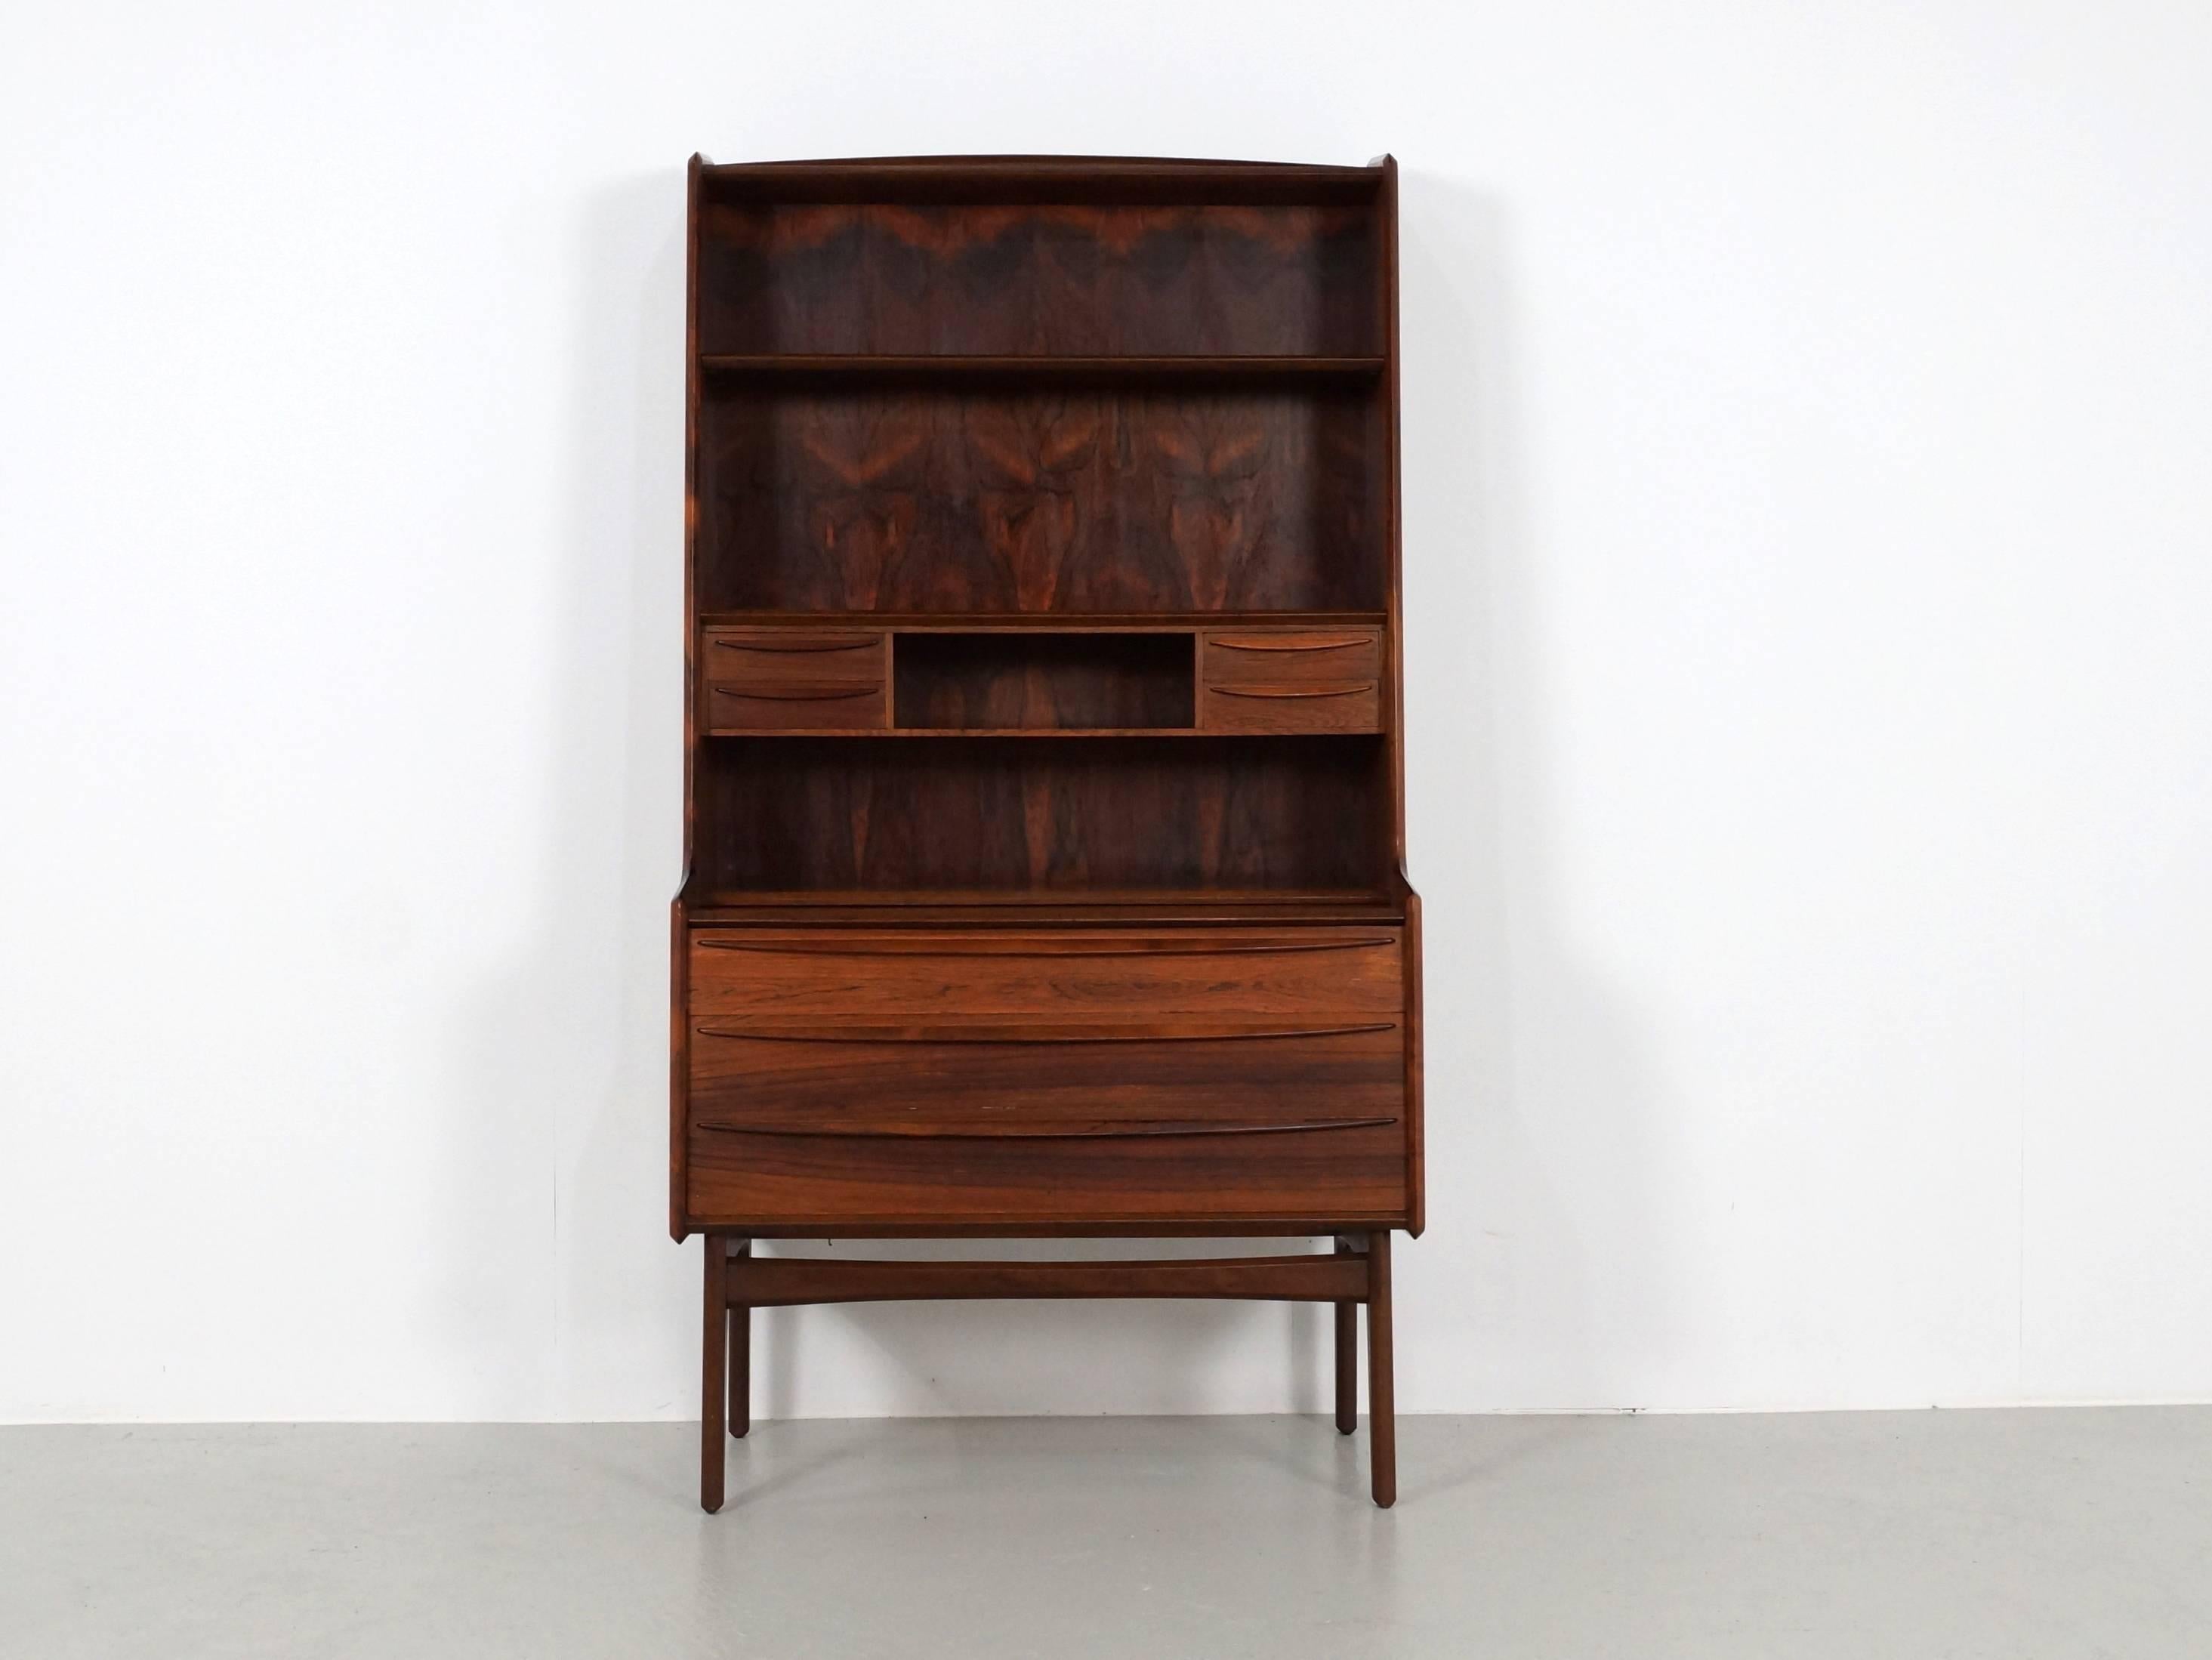 Stunning Mid-Century Scandinavian modern secretary desk in Mahogany 
The pull out shelf is sturdy and great for writing or using your laptop. The lower section has three drawers and the upper section has a section with a series of four small storage